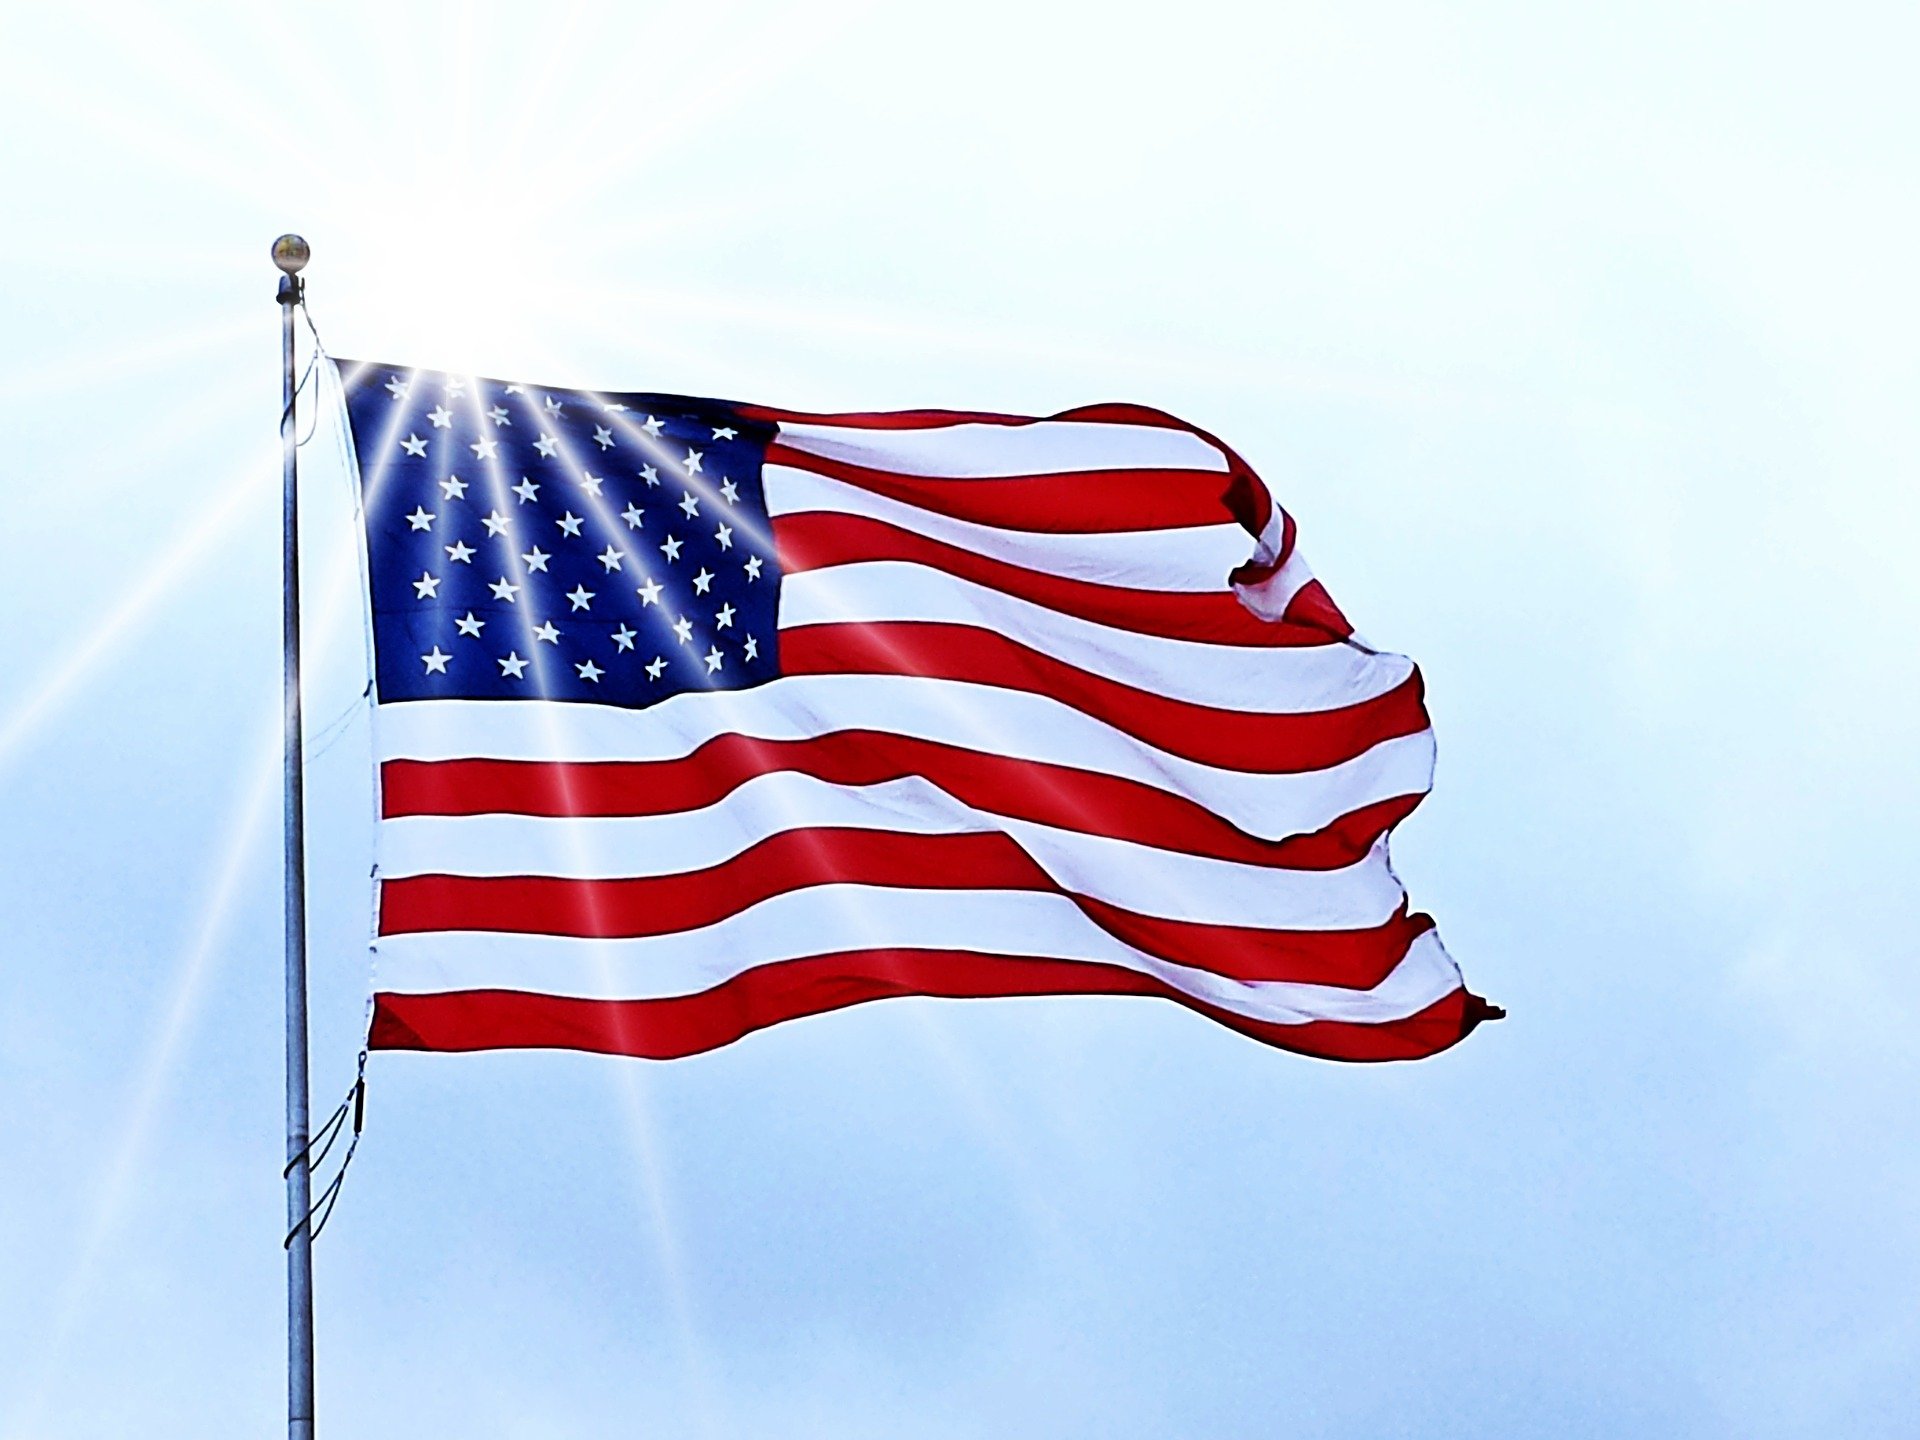 US flag fluttering in the breeze against a cloudless blue sky